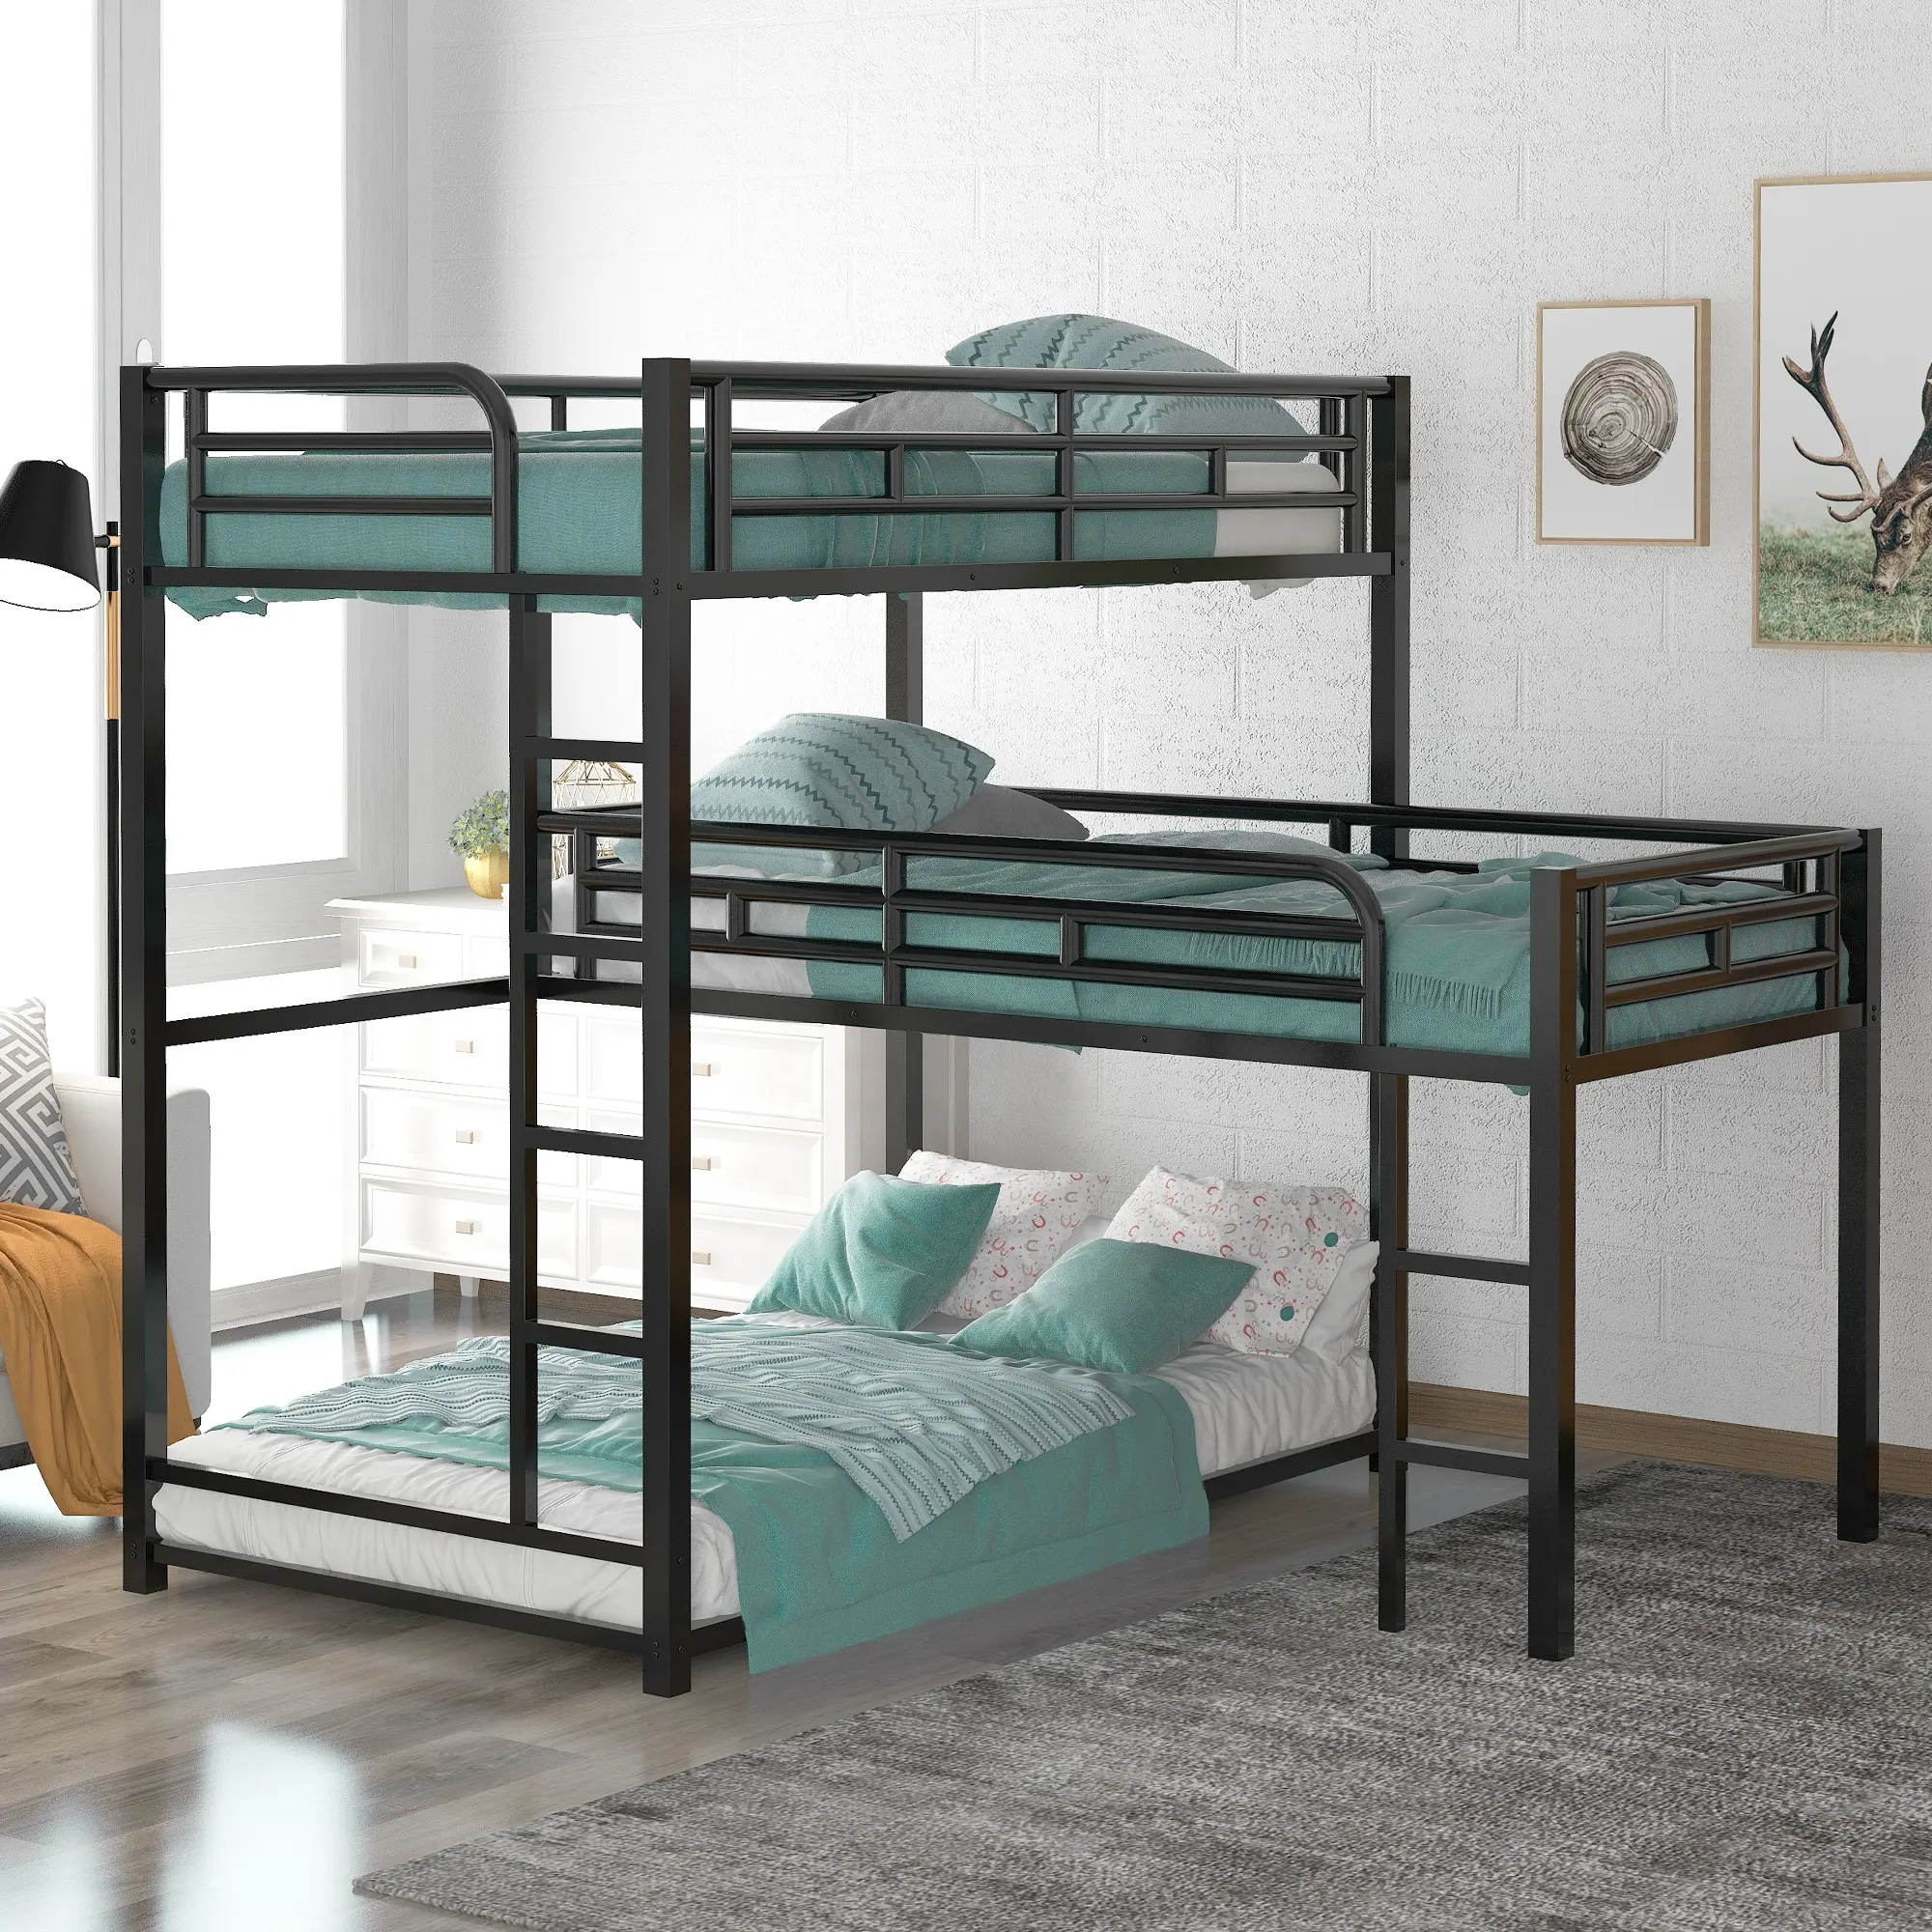 Bellemave home furniture metal triple bunk bed with stairs metal bed frame